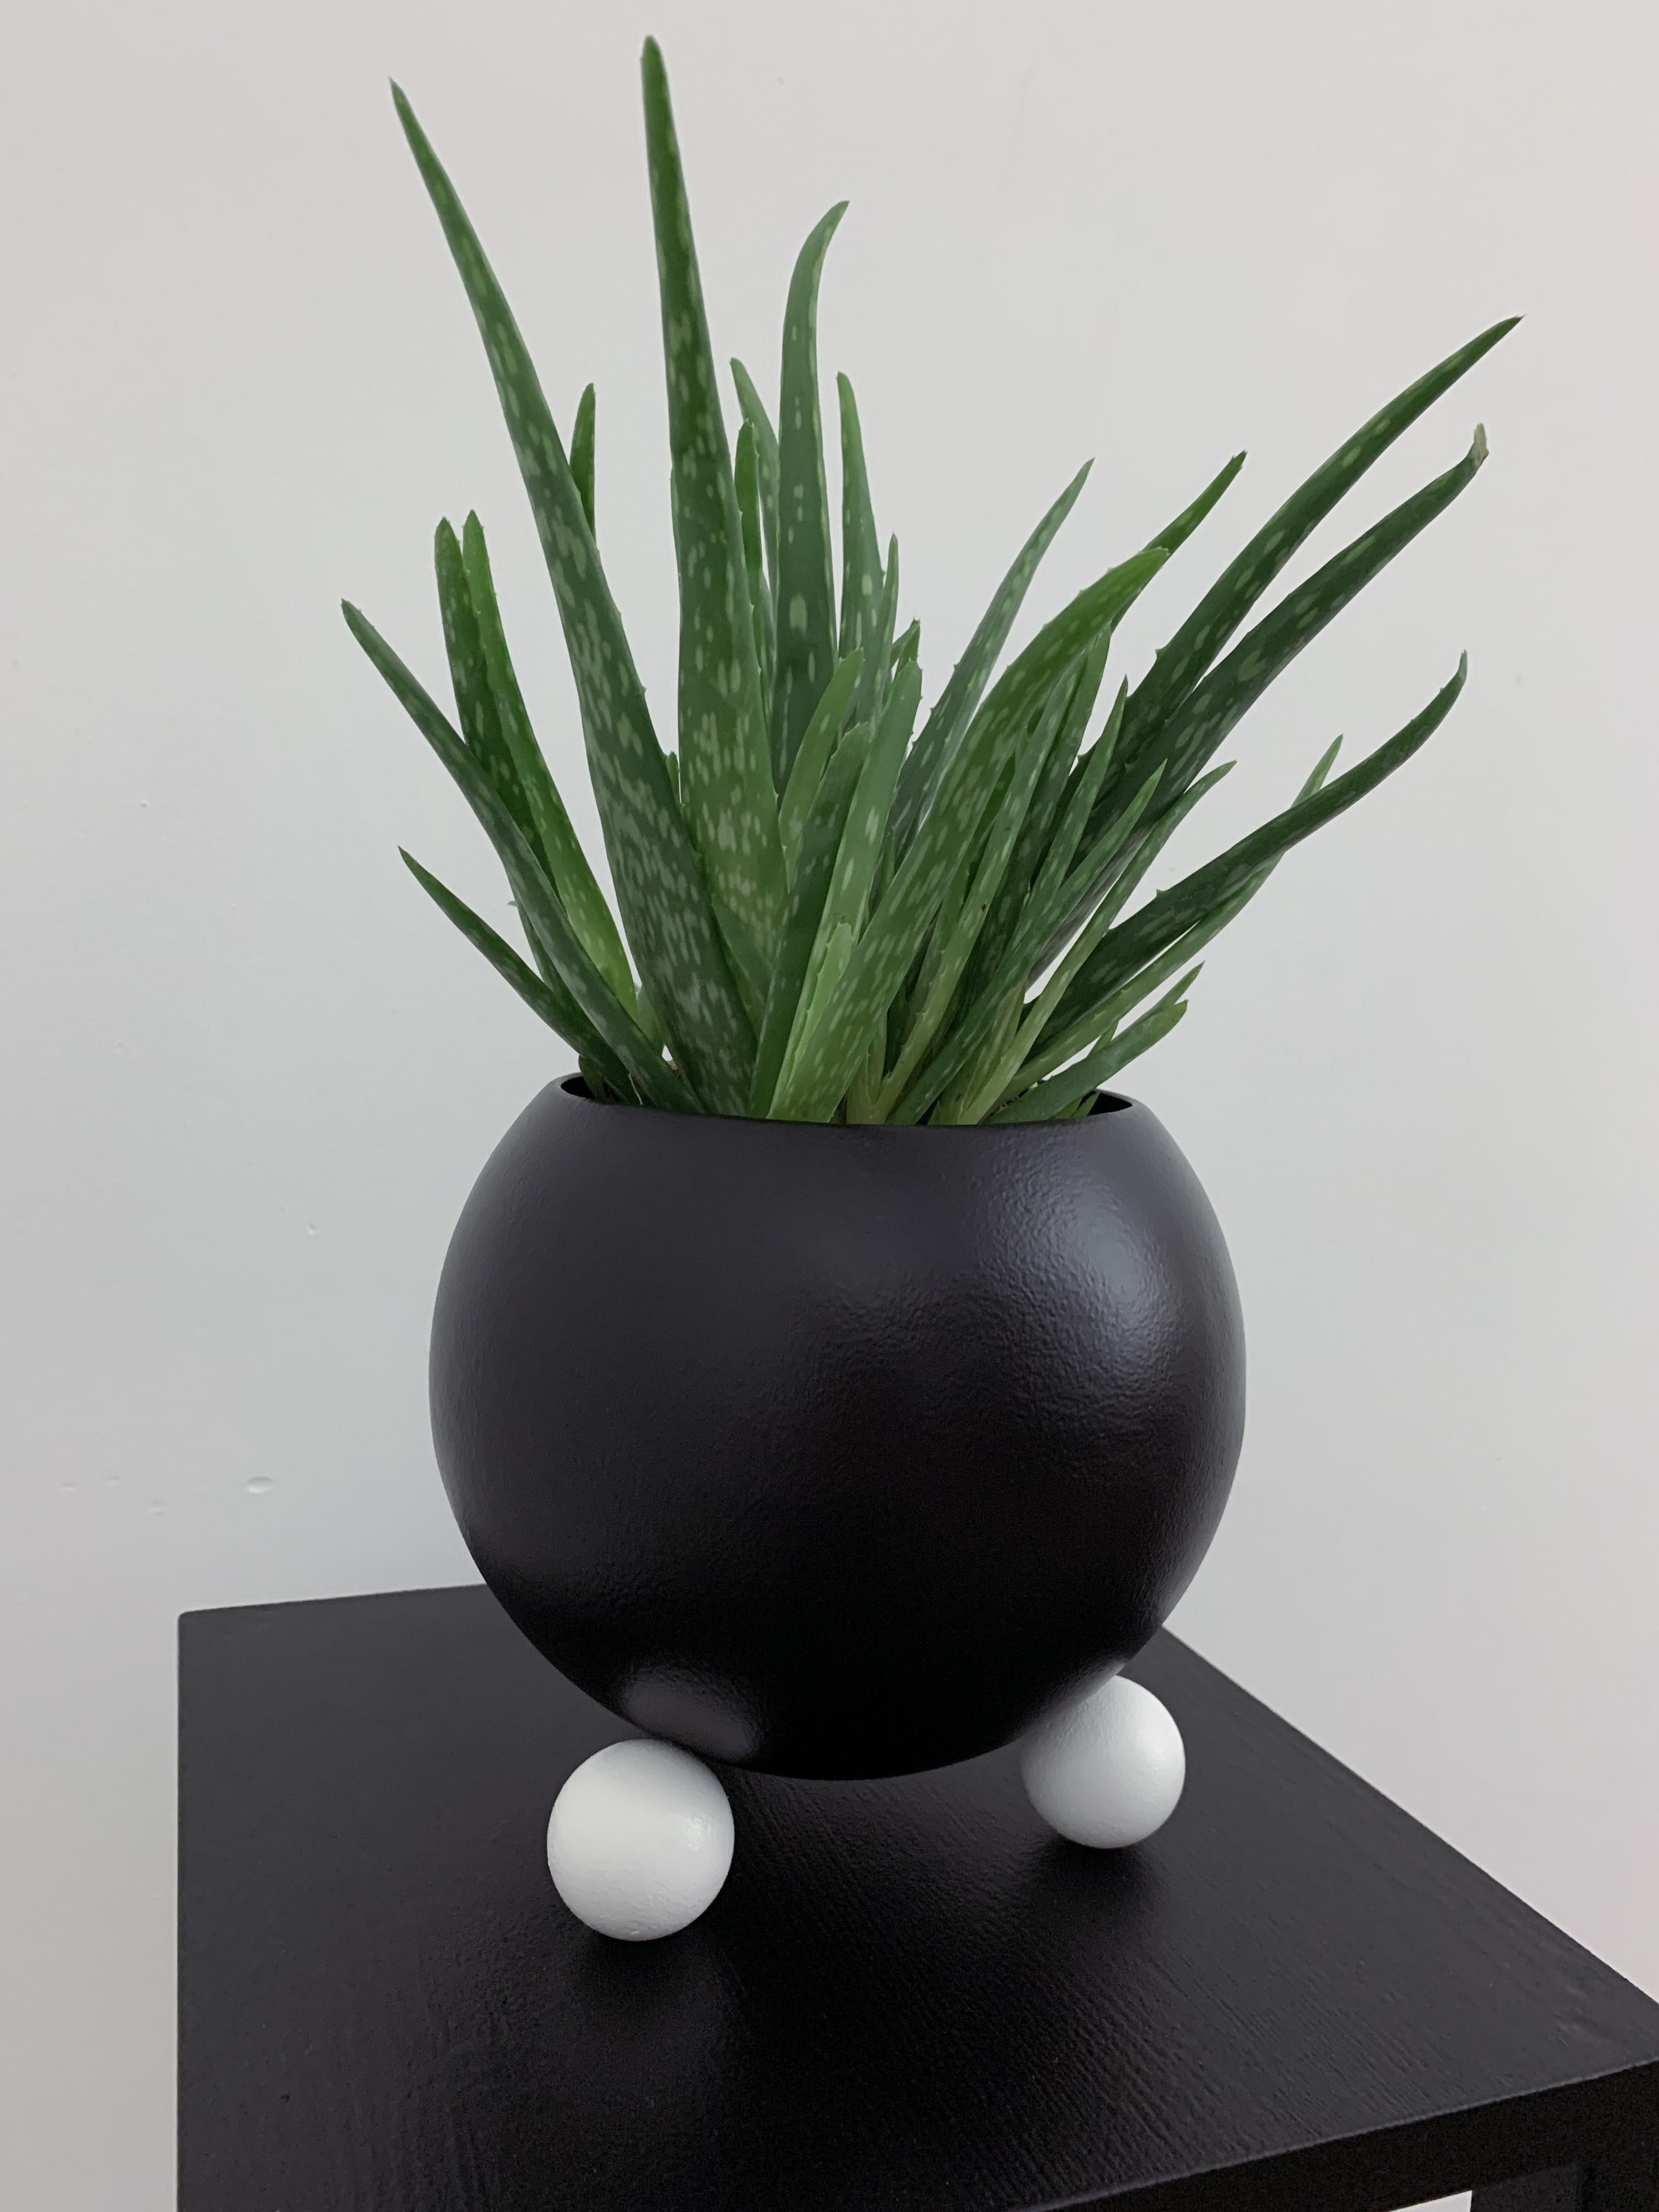 By Iryna Antoniuk (Irena Tone) and Ros Kozhman.
Materials: Steel, strong car acrylic, varnish
Size: height of 19 cm x width of 20 cm x depth of 20 cm x top diameter of 14 cm

Made in England, 2021.

Arty decorative hand-made plant pot ideal for